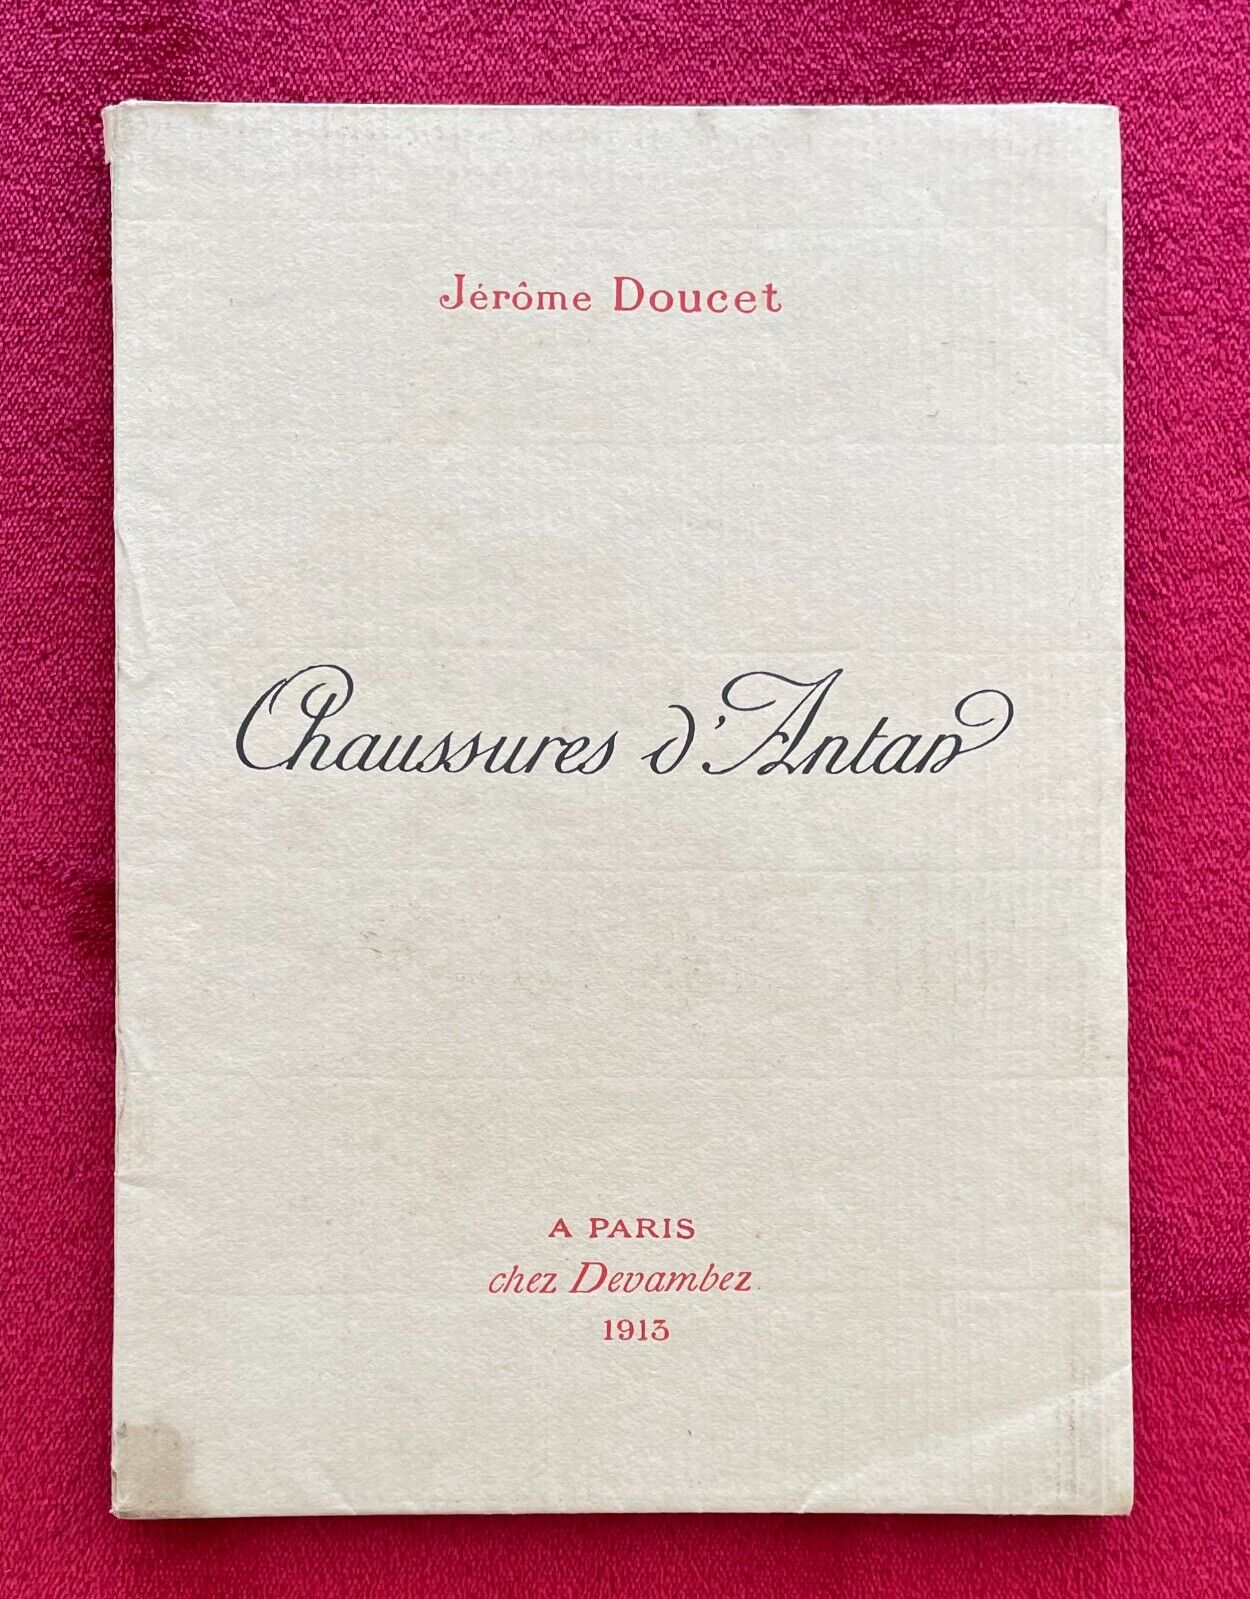 CHAUSSURES D'ANTAN by JEROME DOUCET - 1913 FIRST ED & LTD. ED - ONE OF 10 COPIES